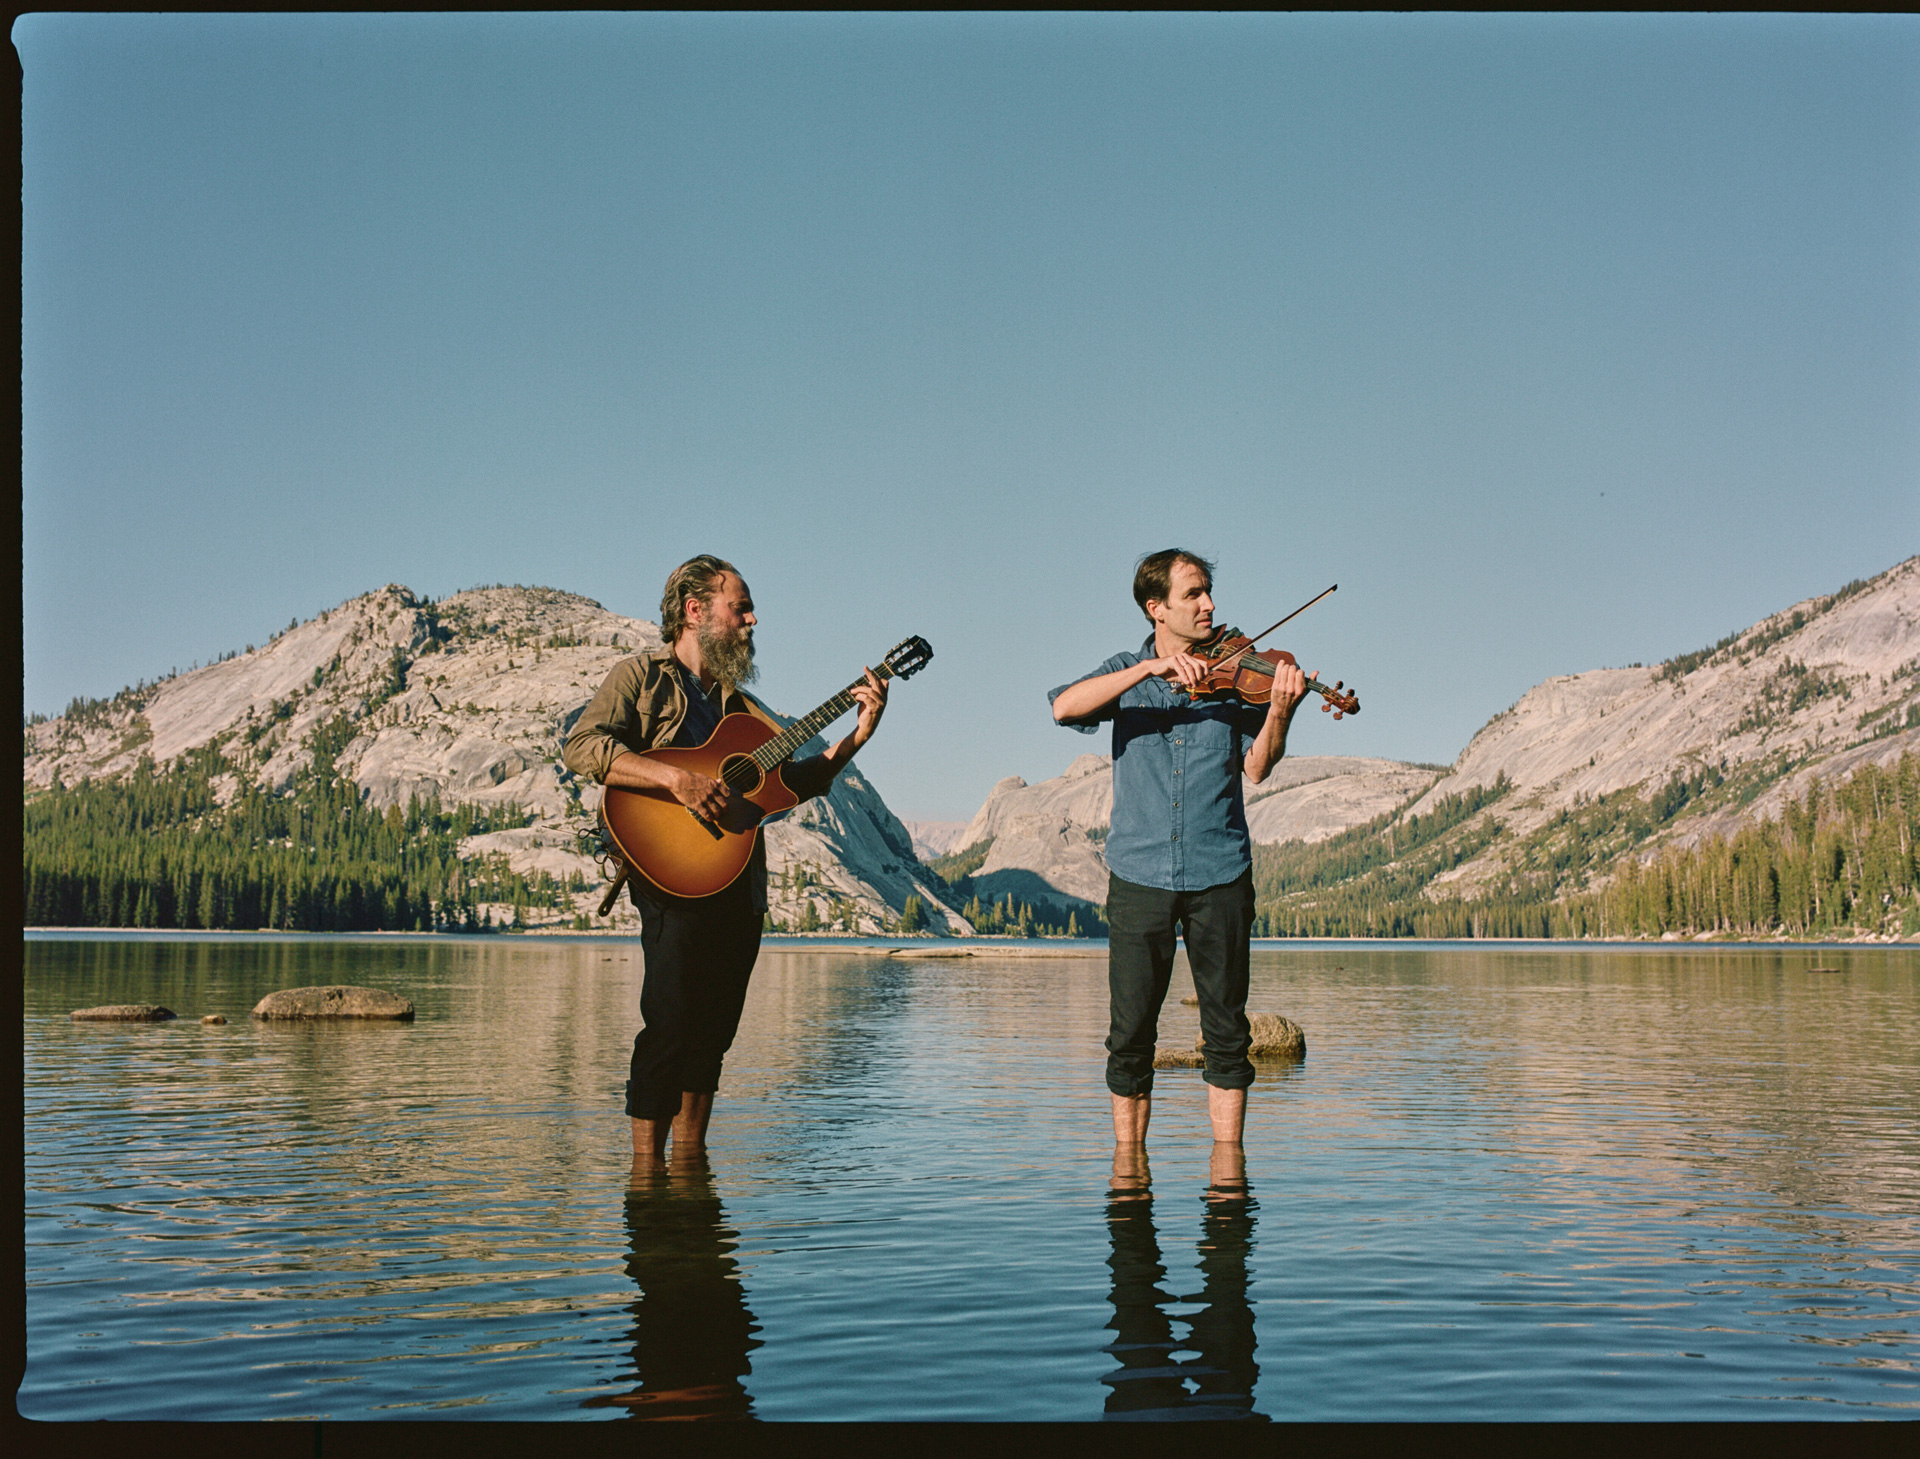 Lucky Brand’s 'Play for the Parks' Transports Andrew Bird and Iron & Wine to Yosemite Park